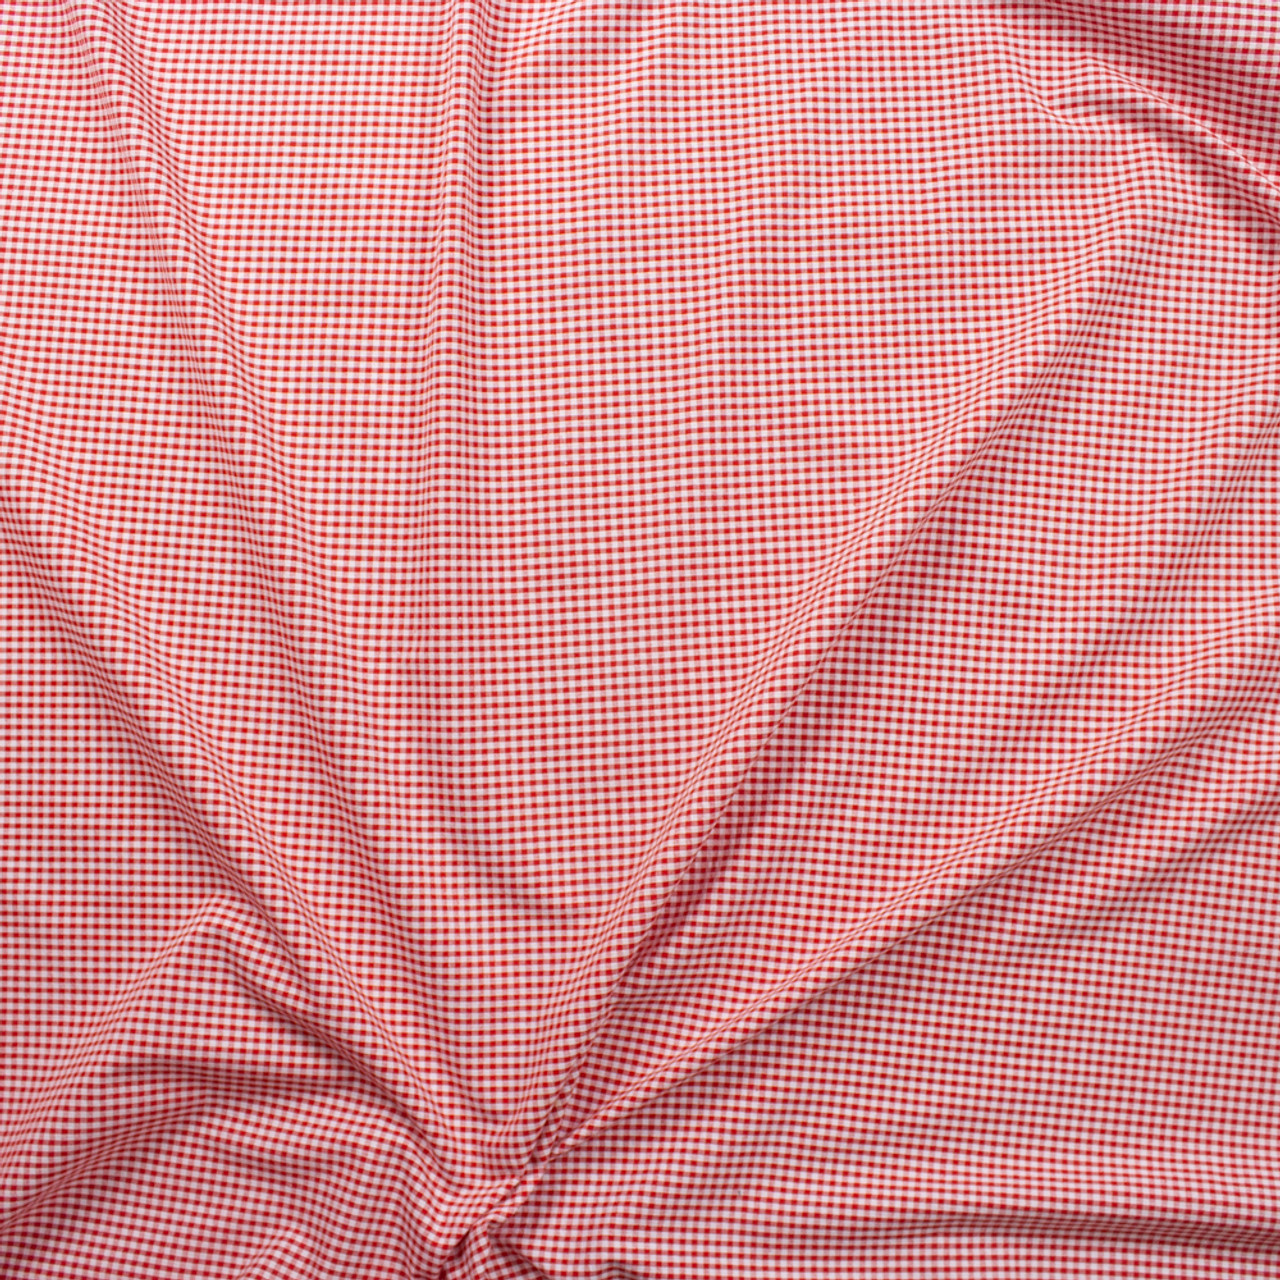 Cali Fabrics Red and White 1/8” Gingham Seersucker Fabric by the Yard